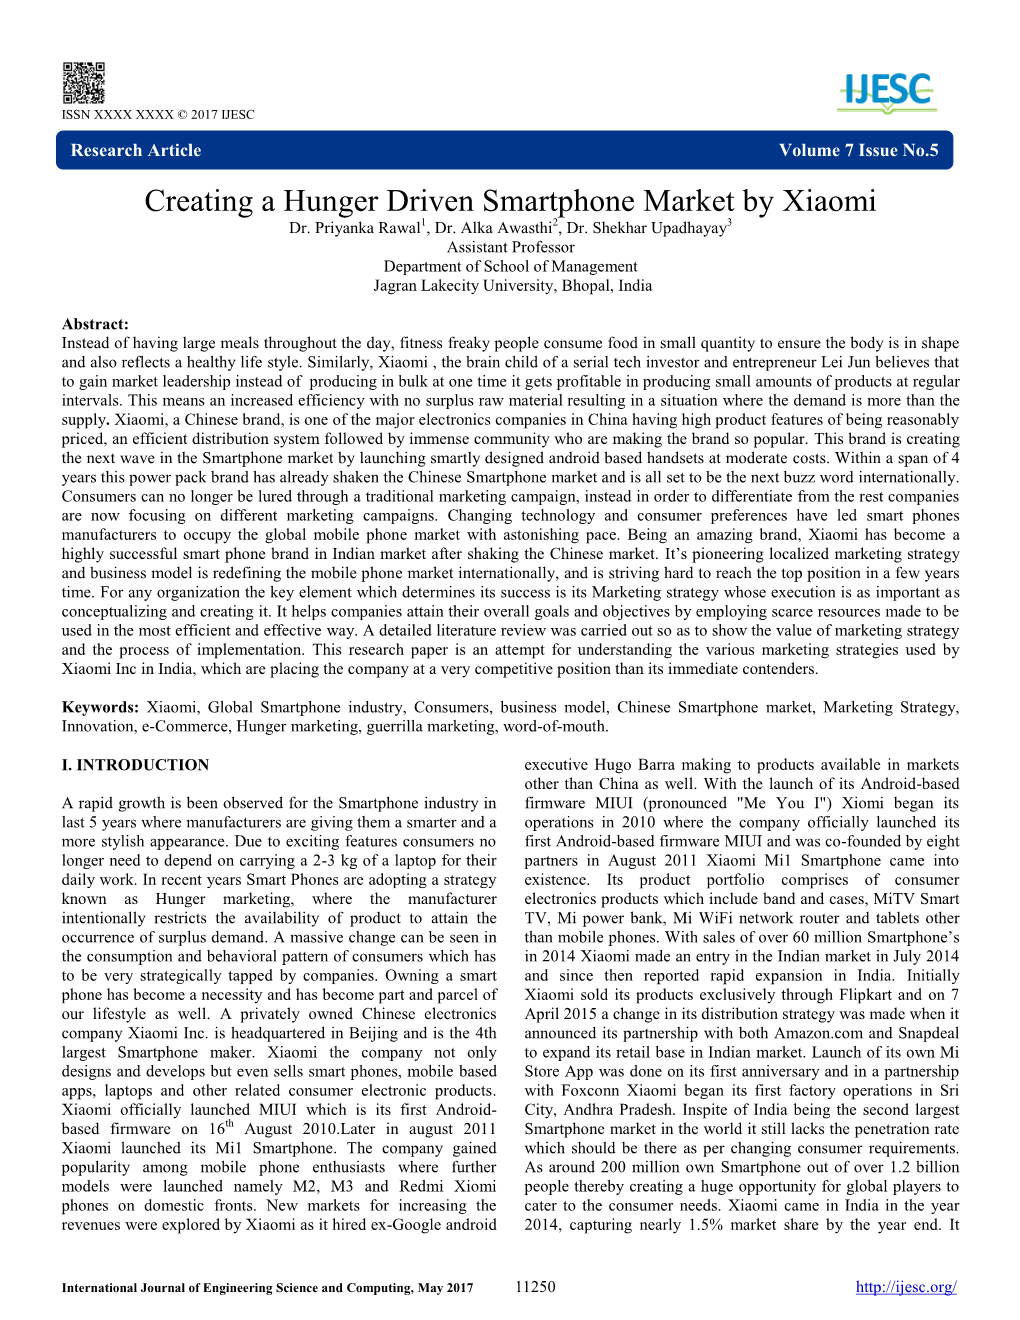 Creating a Hunger Driven Smartphone Market by Xiaomi Dr